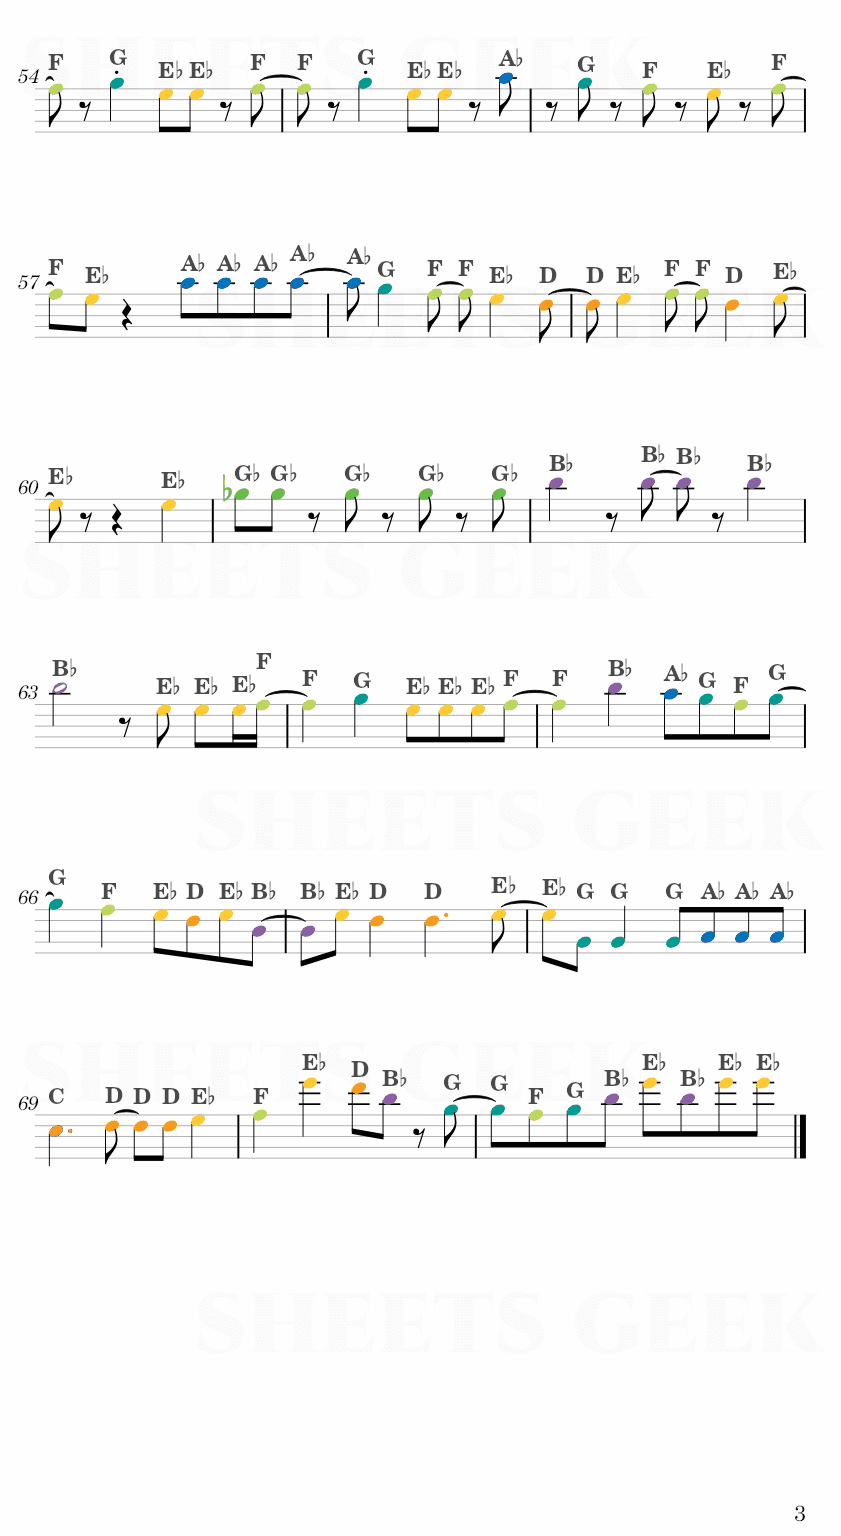 Imagination - Haikyuu!! Opening 1 Easy Sheet Music Free for piano, keyboard, flute, violin, sax, cello page 3